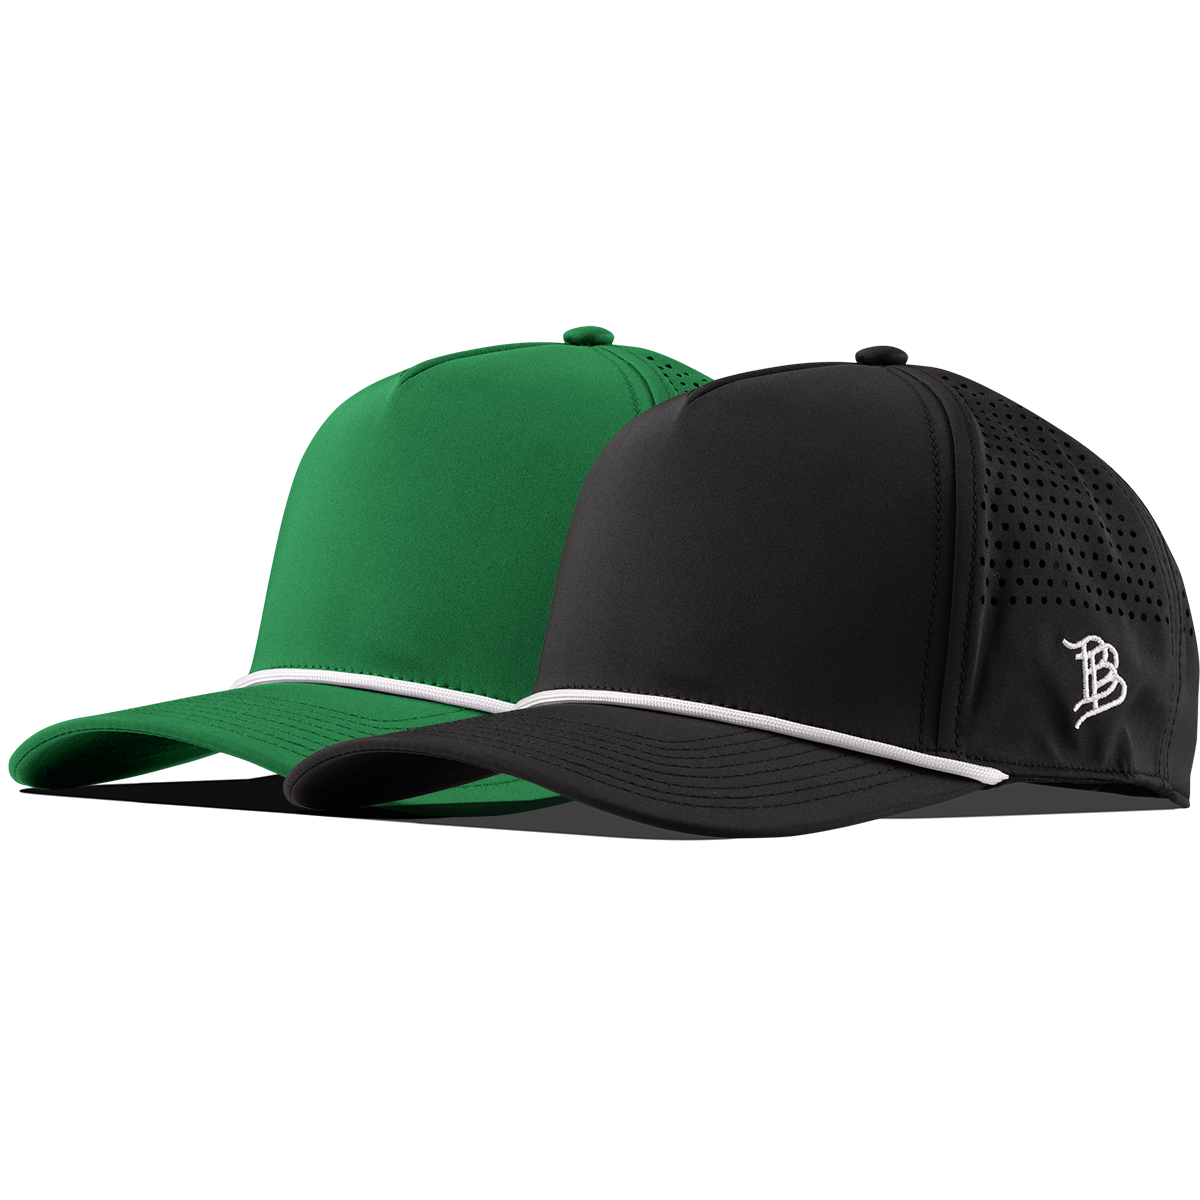 Bare Curved 5 Panel Rope 2-Pack Black/White + Kelly Green/White